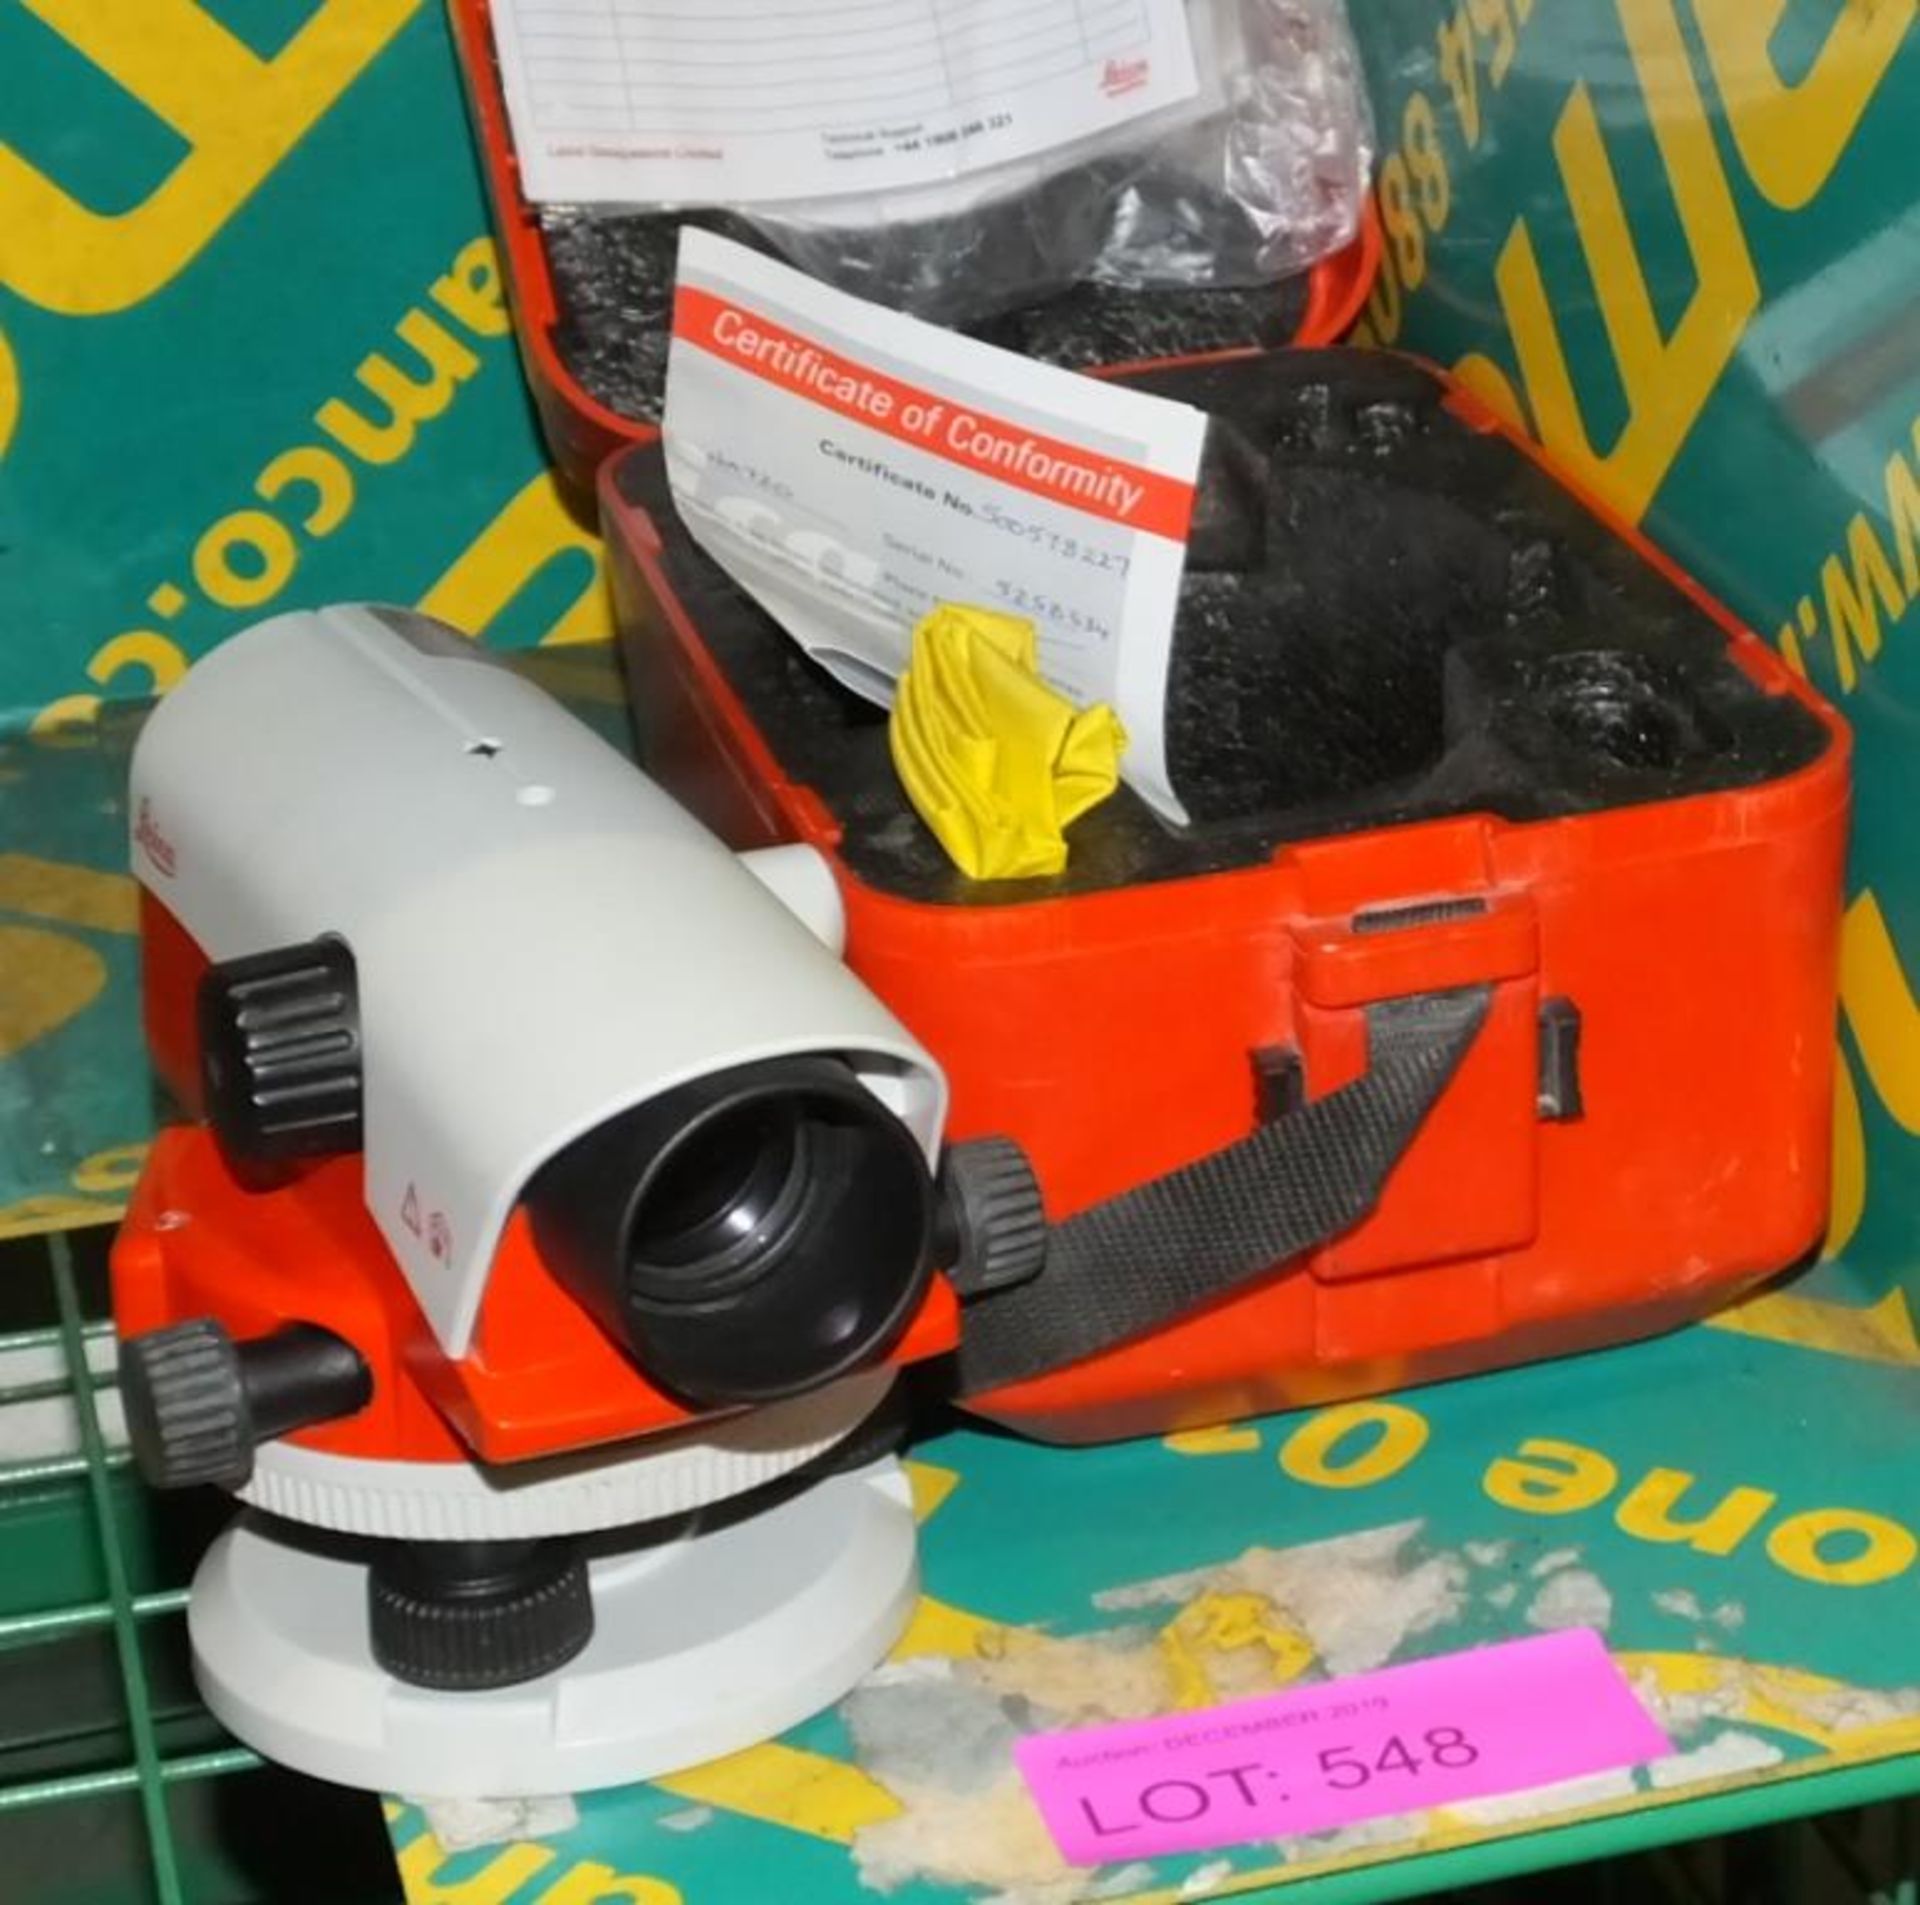 Leica NA720 Surveyors Level in carry case